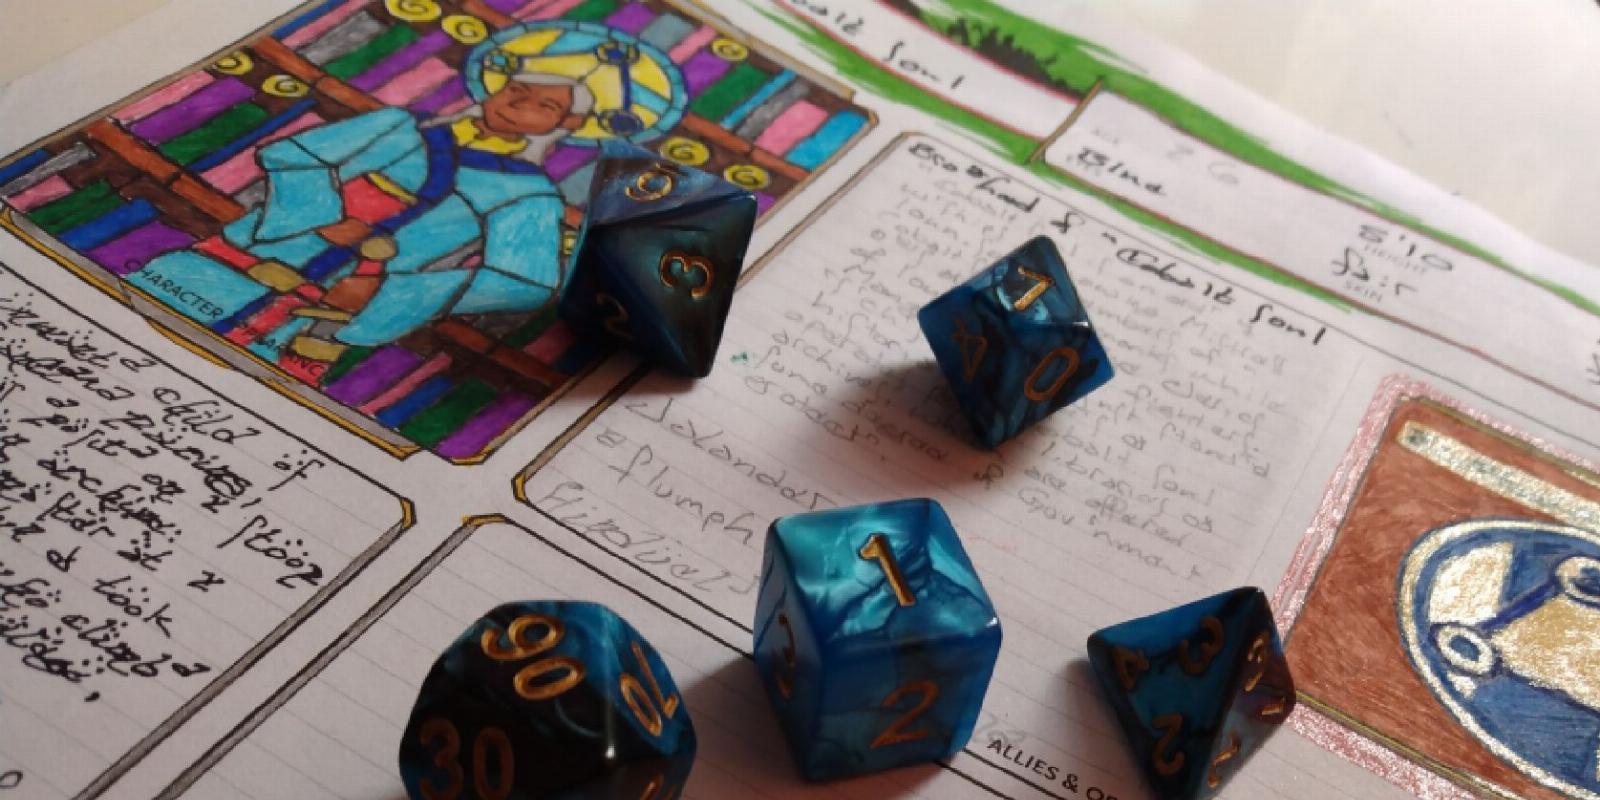 5 Roll20 Features All Tabletop Gamers Should Be Using